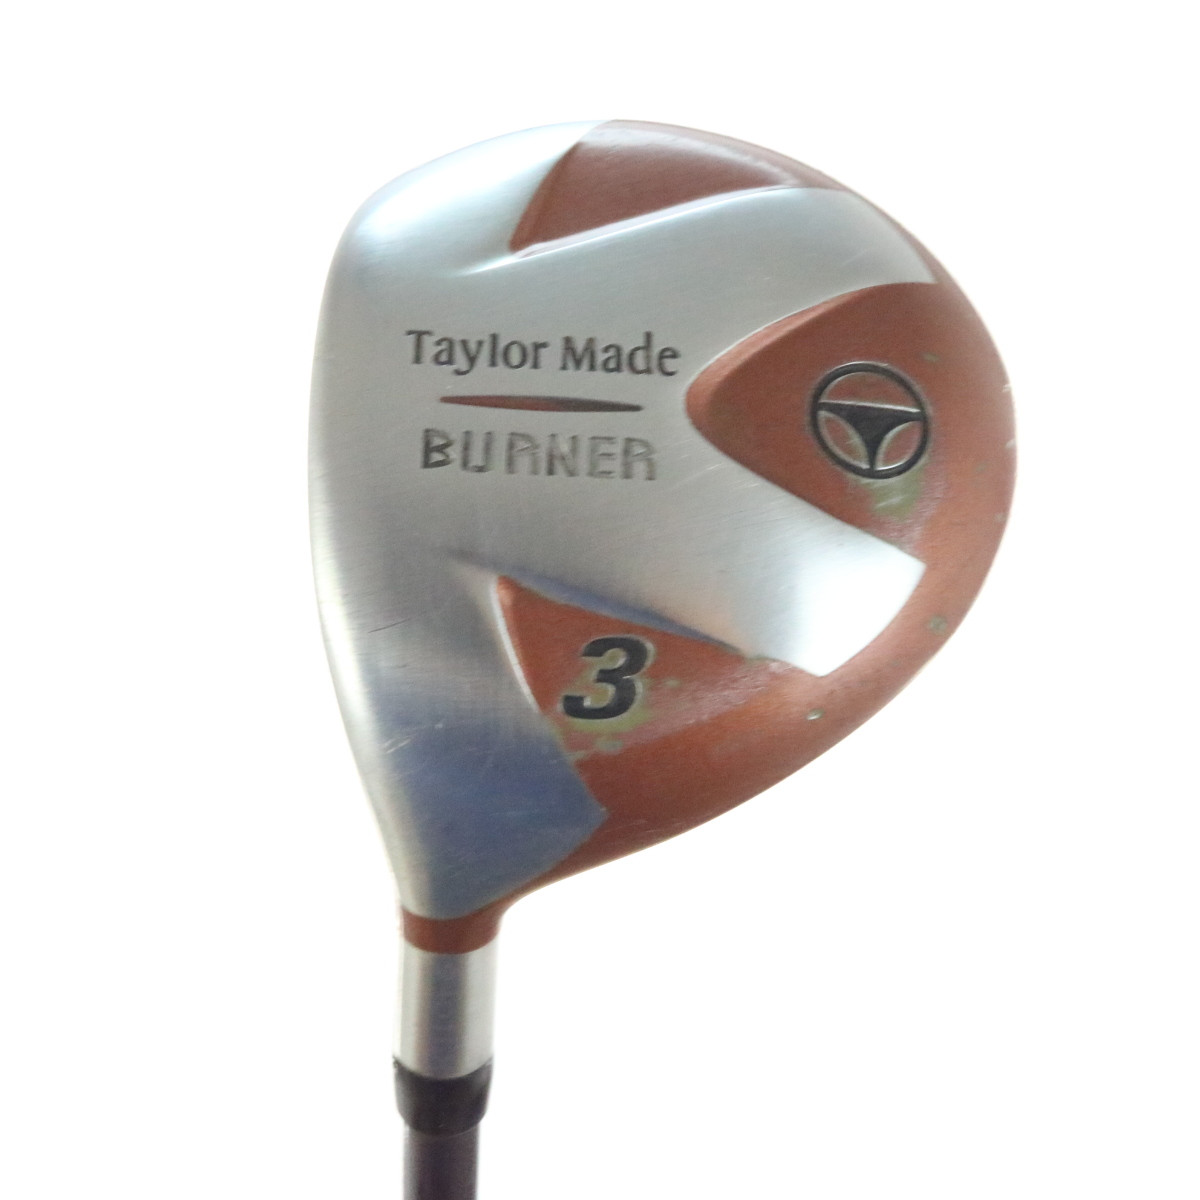 taylormade bubble shaft specs